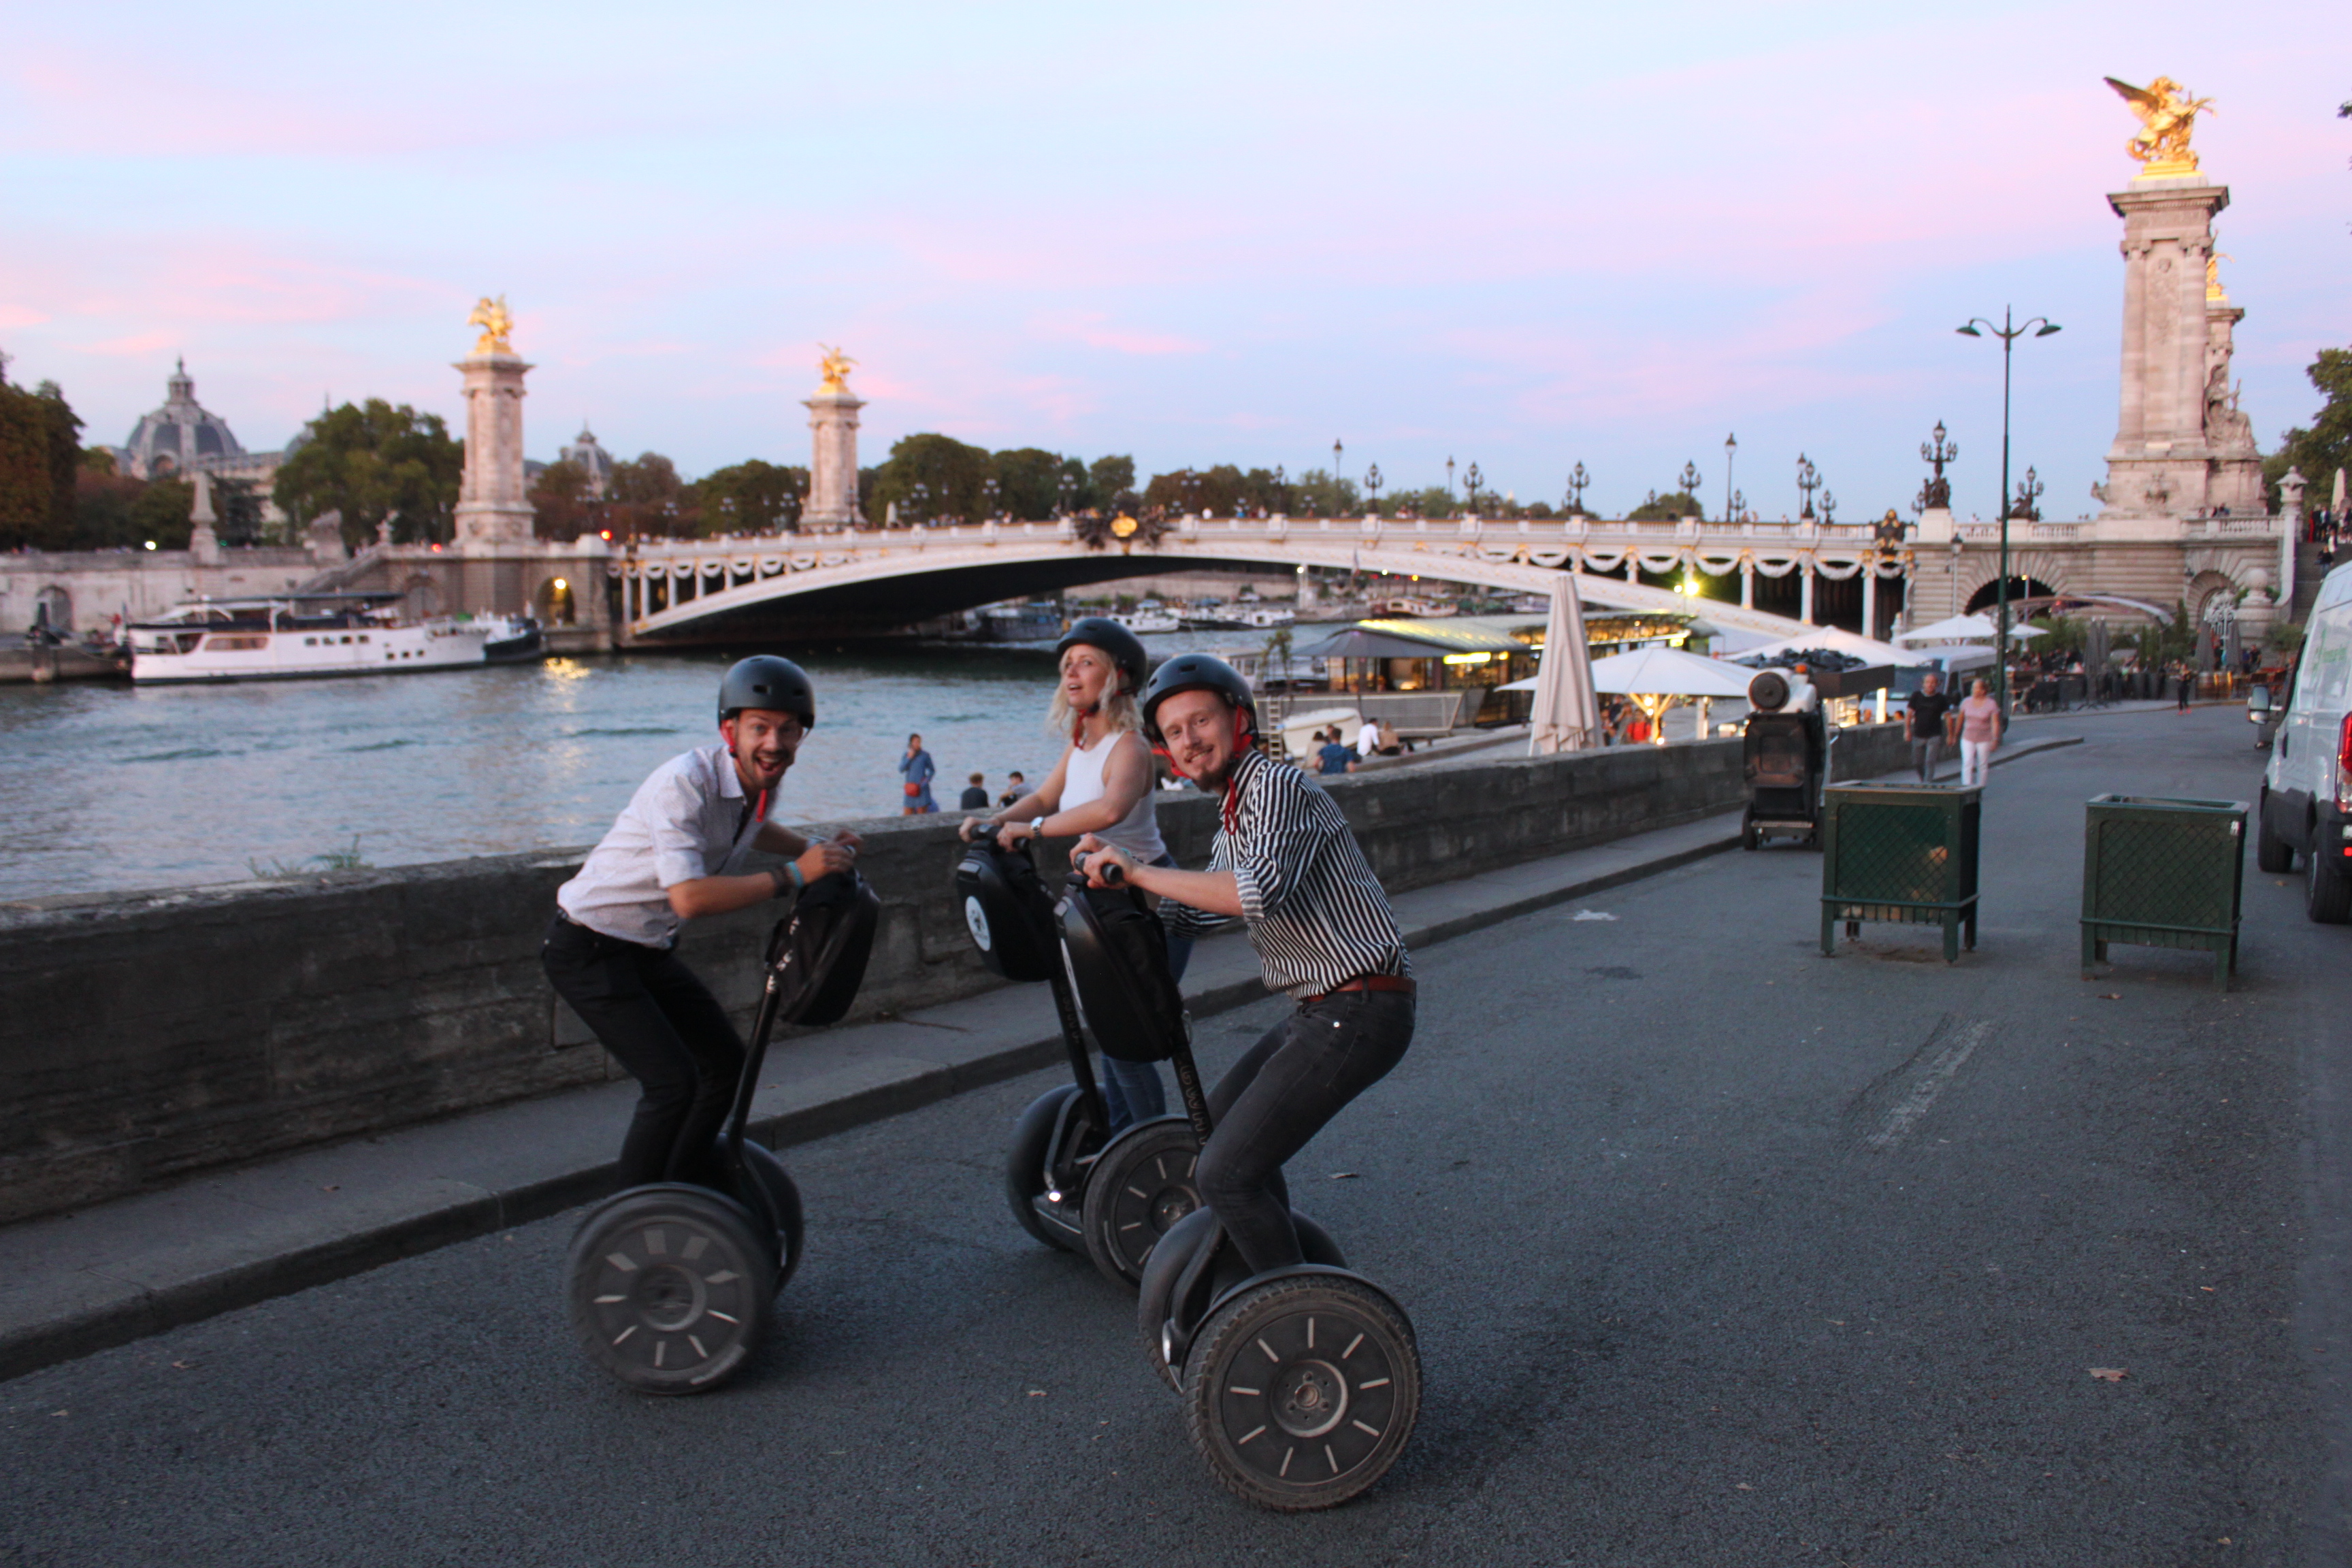 Segway tour make a unique and exciting experience during any